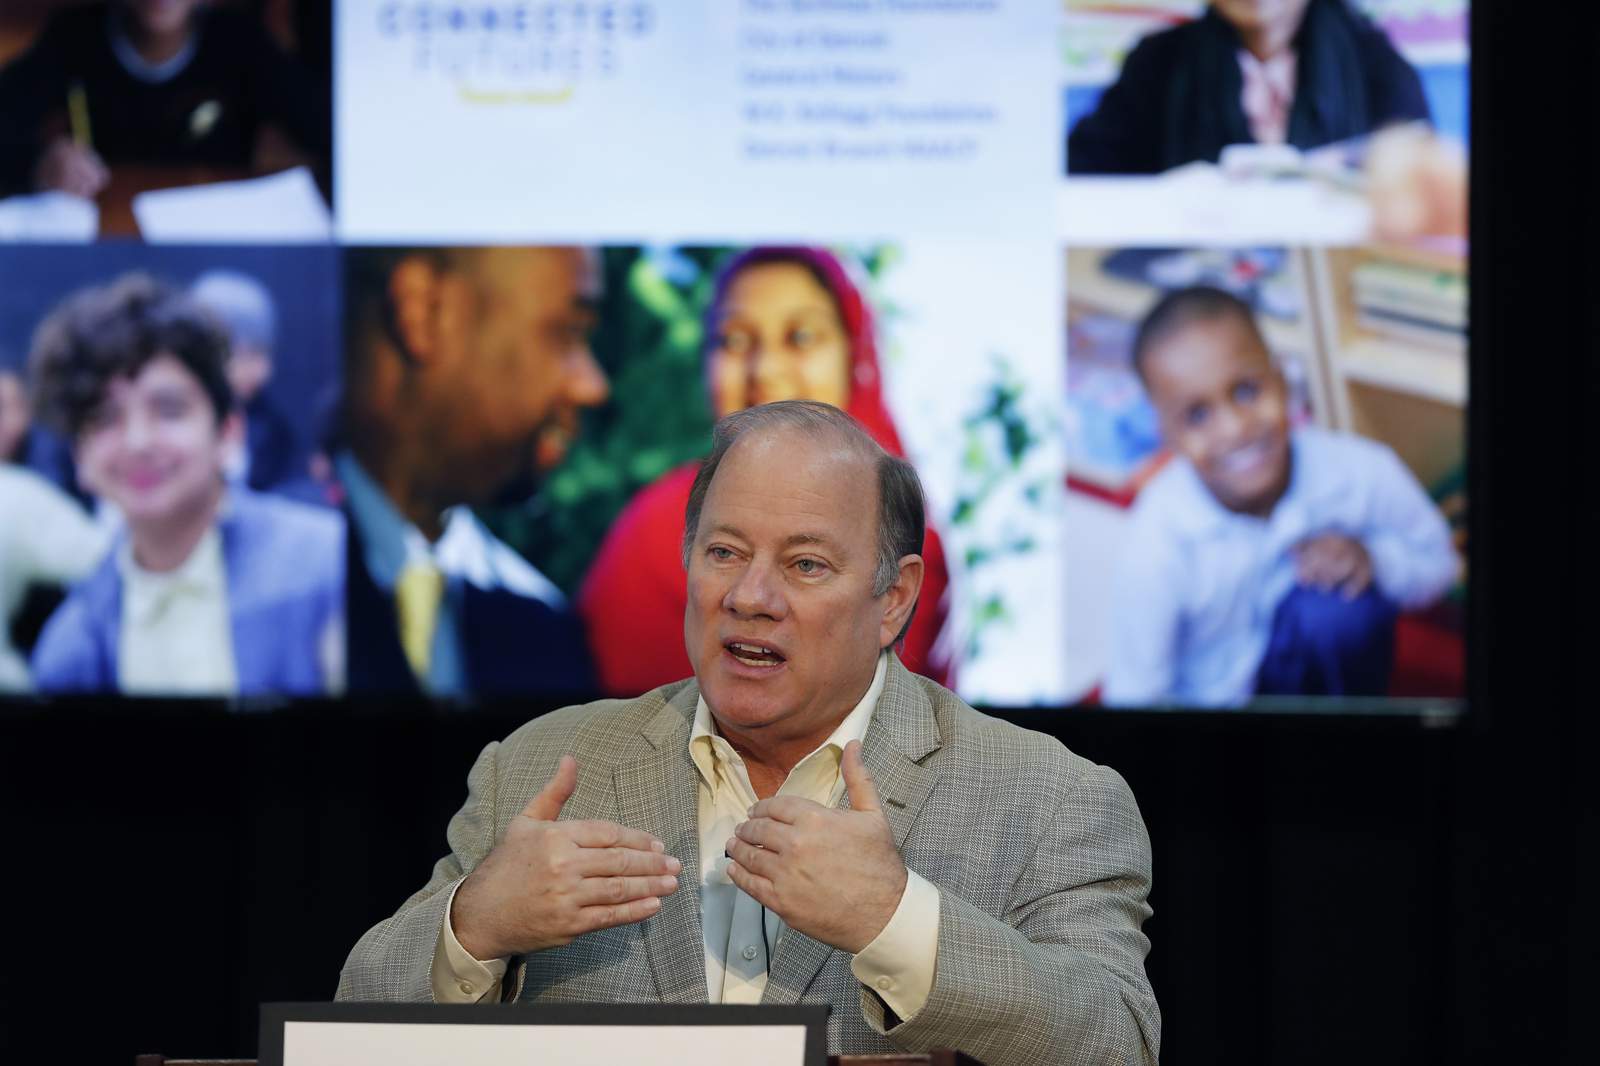 Detroit Mayor Mike Duggan delivers 2021 State of the City